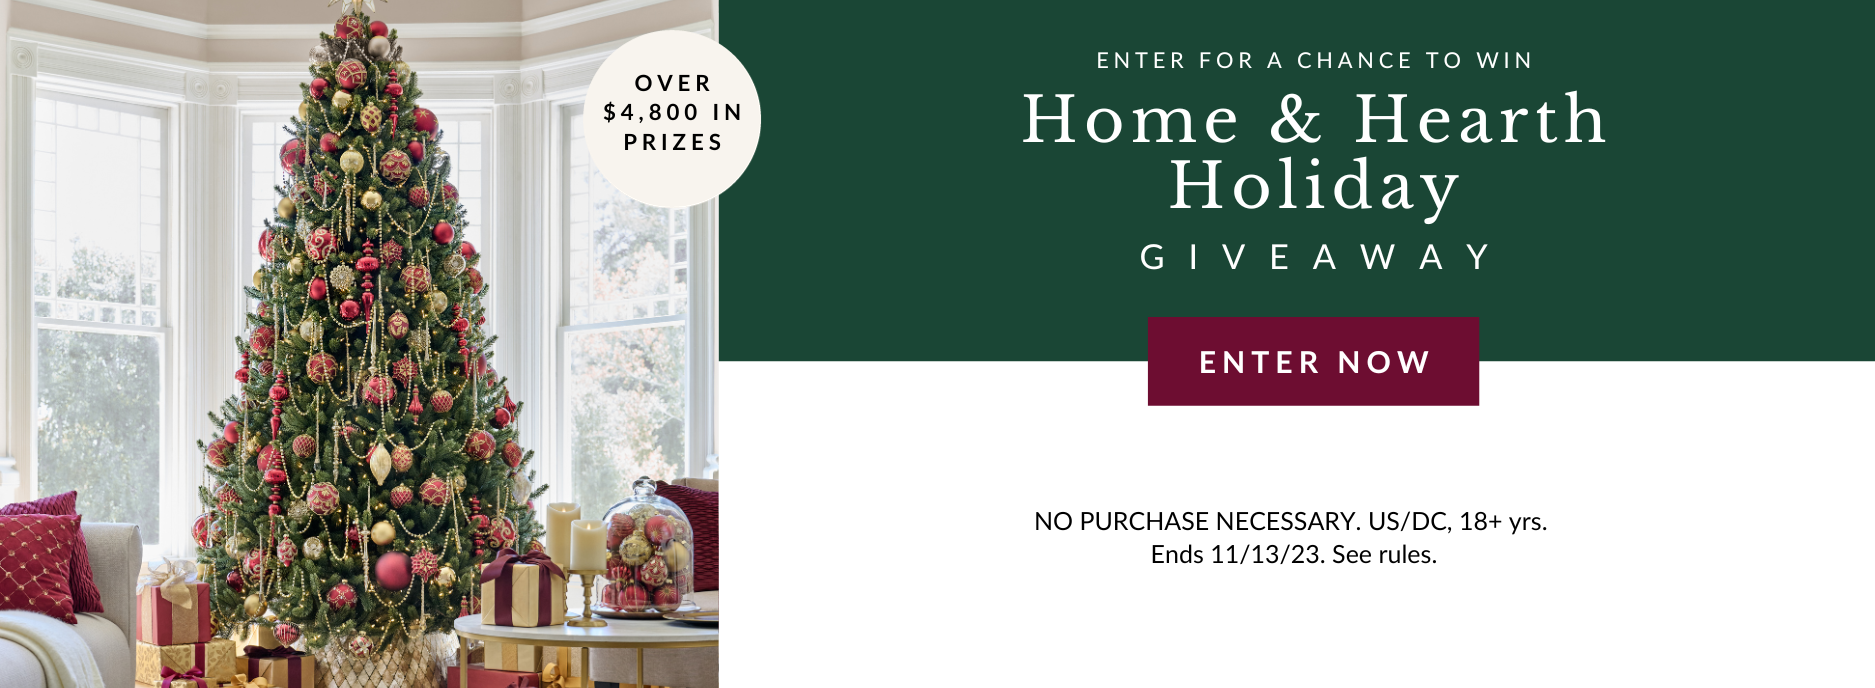 Enter for a chance to win | Home & Heart Holiday GIVEAWAY | Enter Now | No purchase necessary. US/DC, 18+ yrs. Ends 11/13/23. See rules.